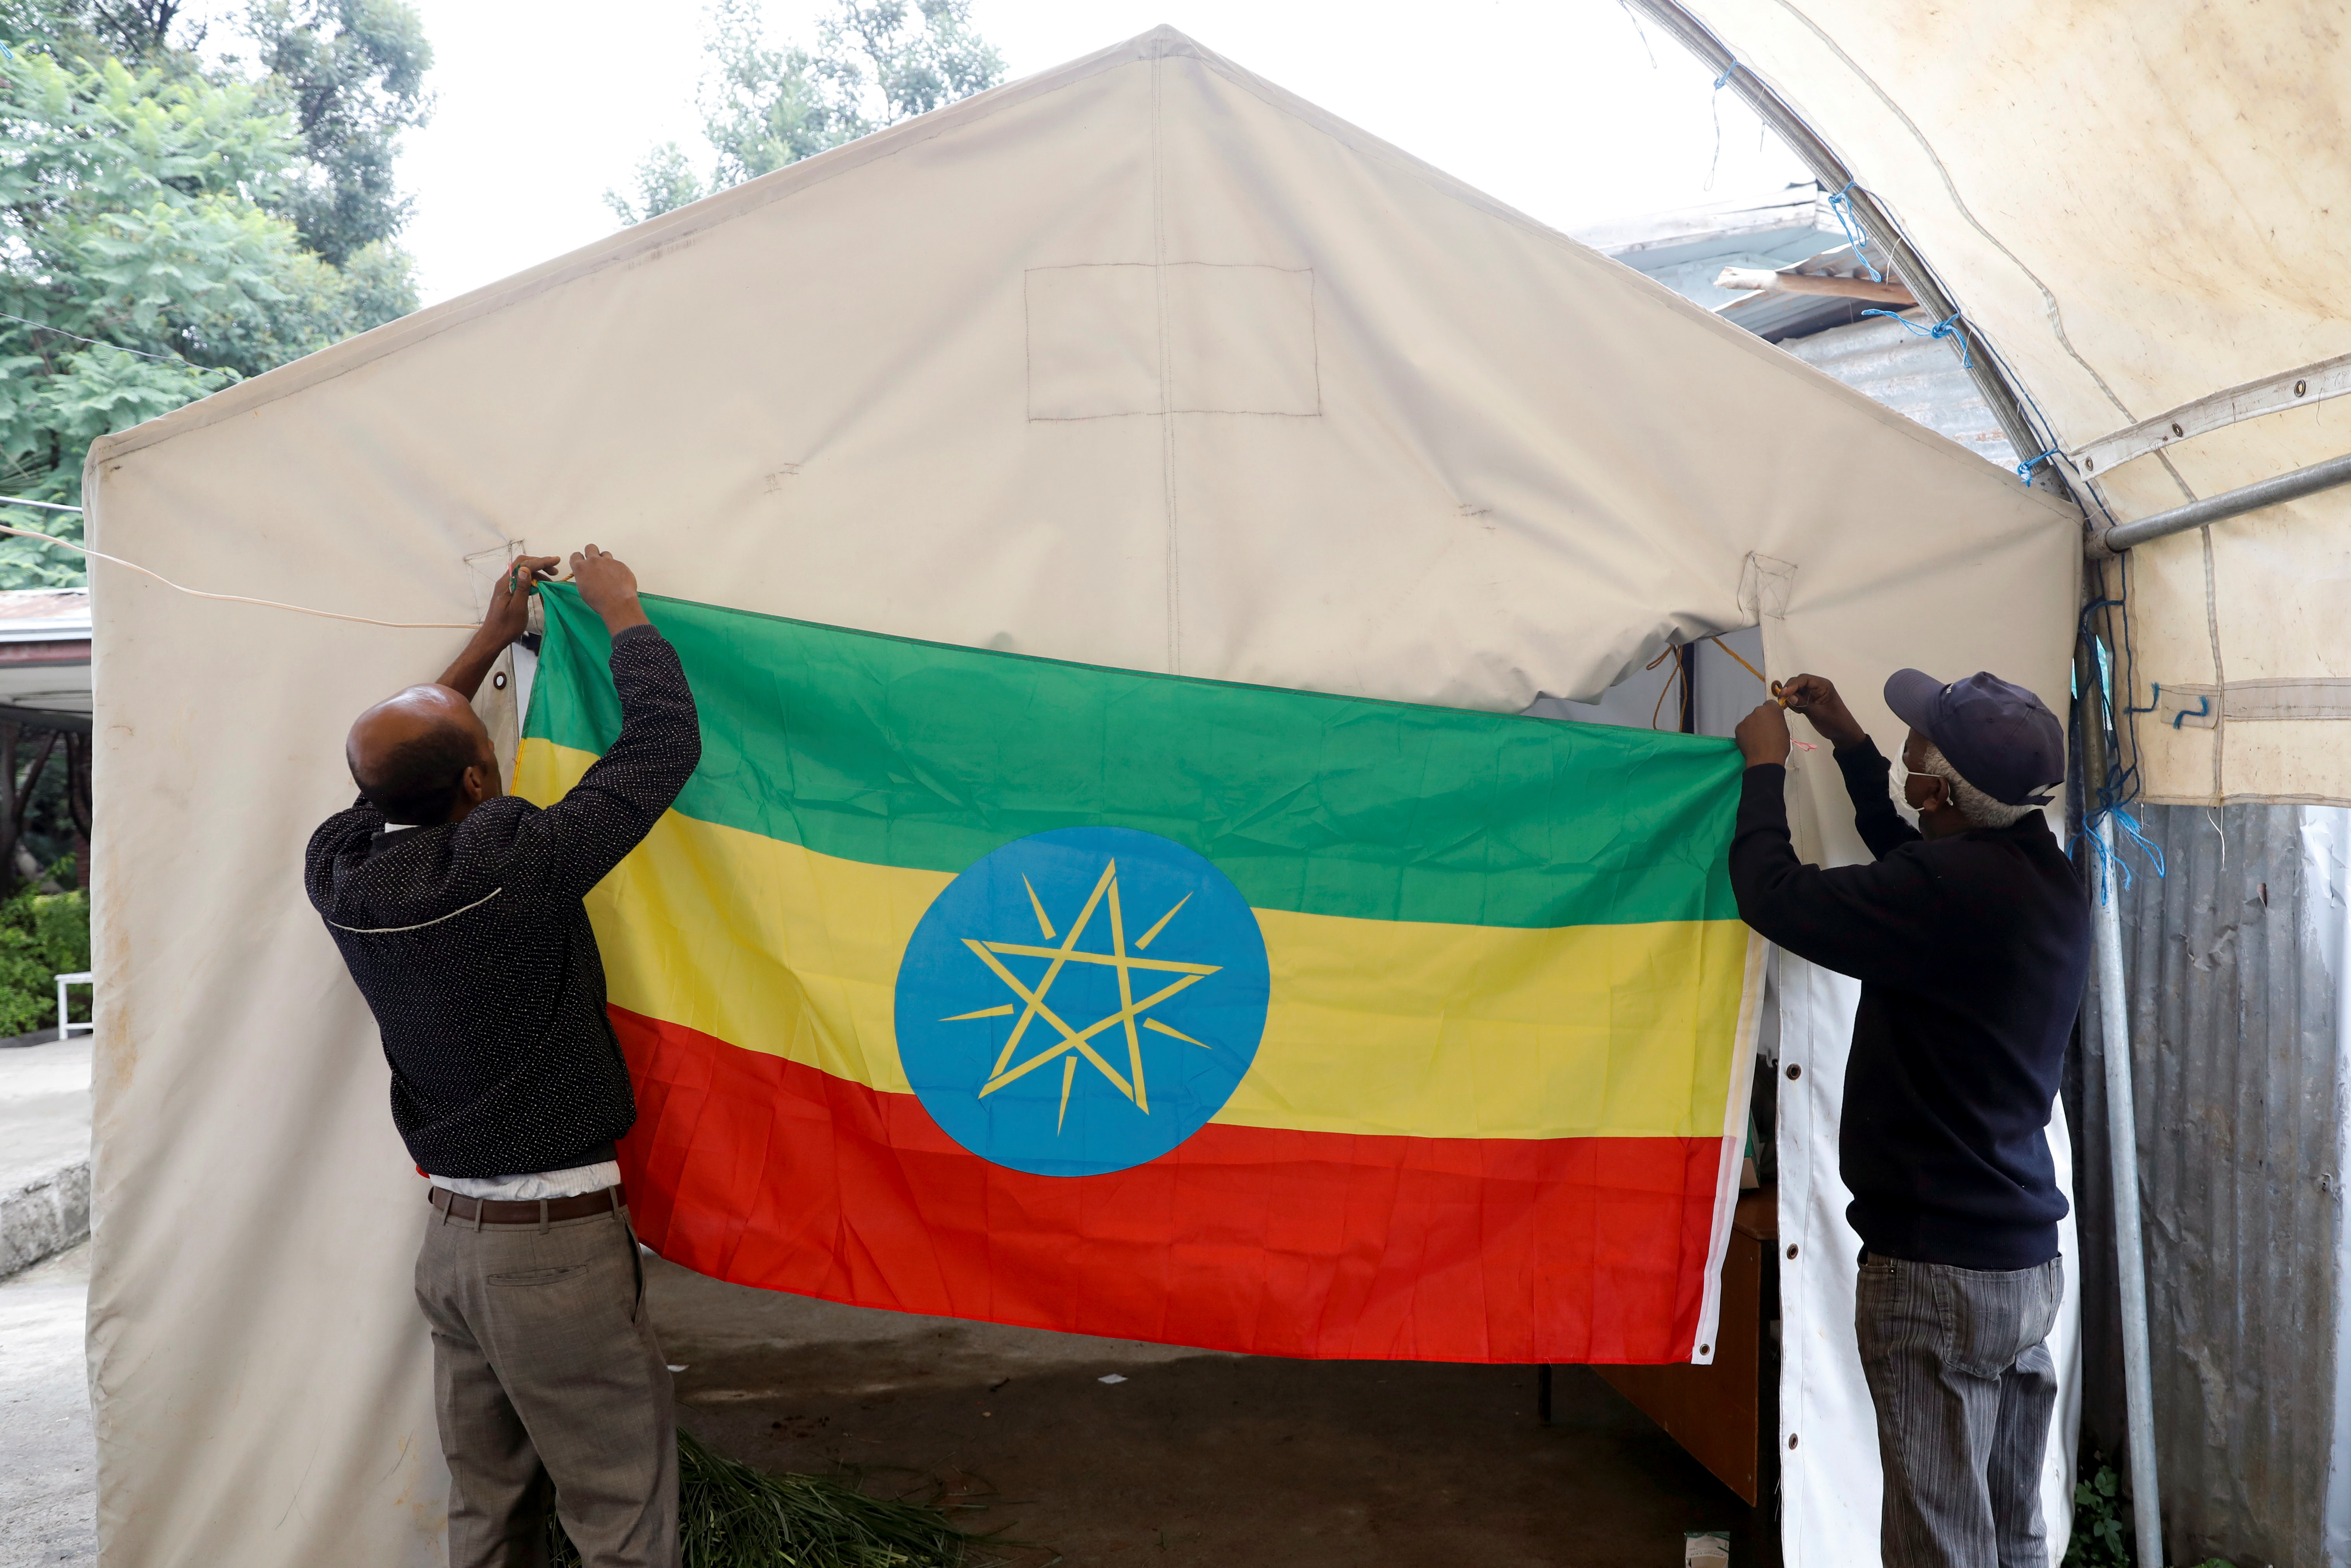 Preparations for Ethiopia's parliamentary and regional elections in Addis Ababa